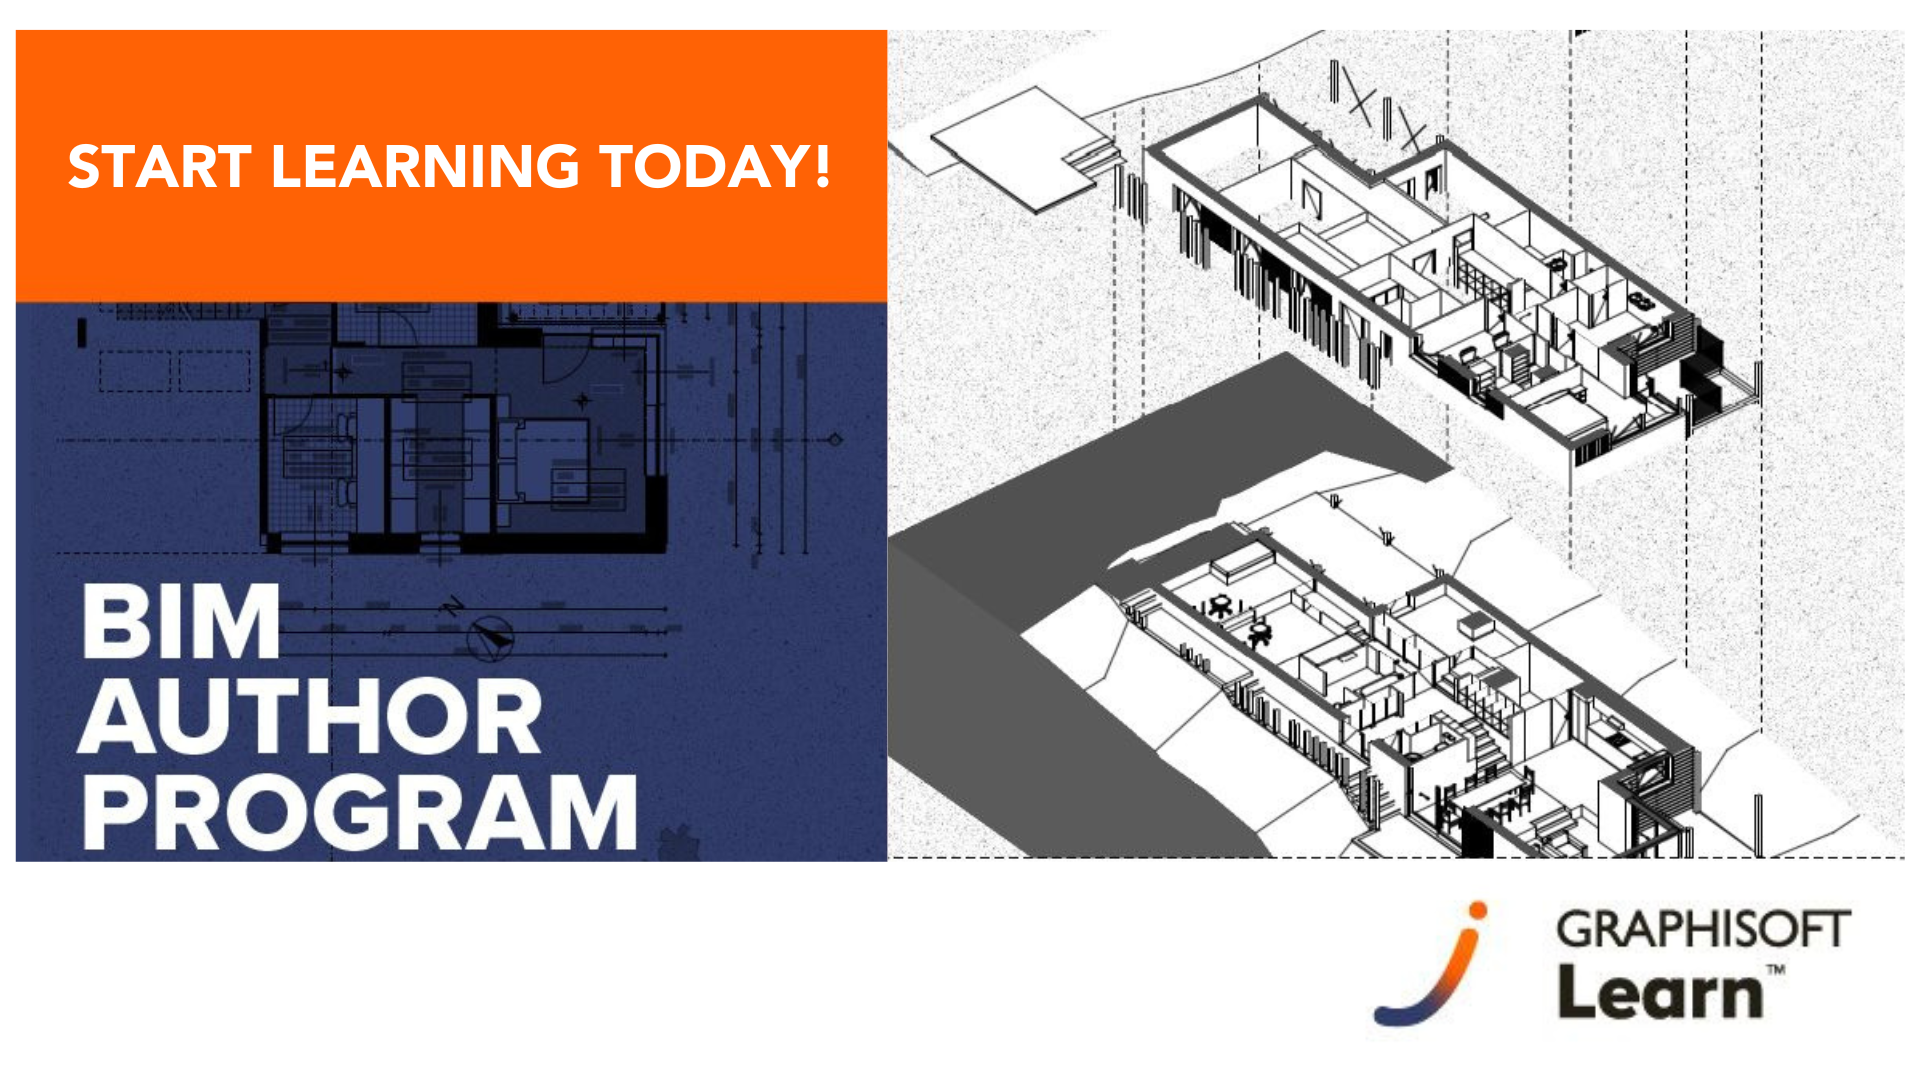 Learn to be a BIM Author with Graphisoft’s BIM Author Program